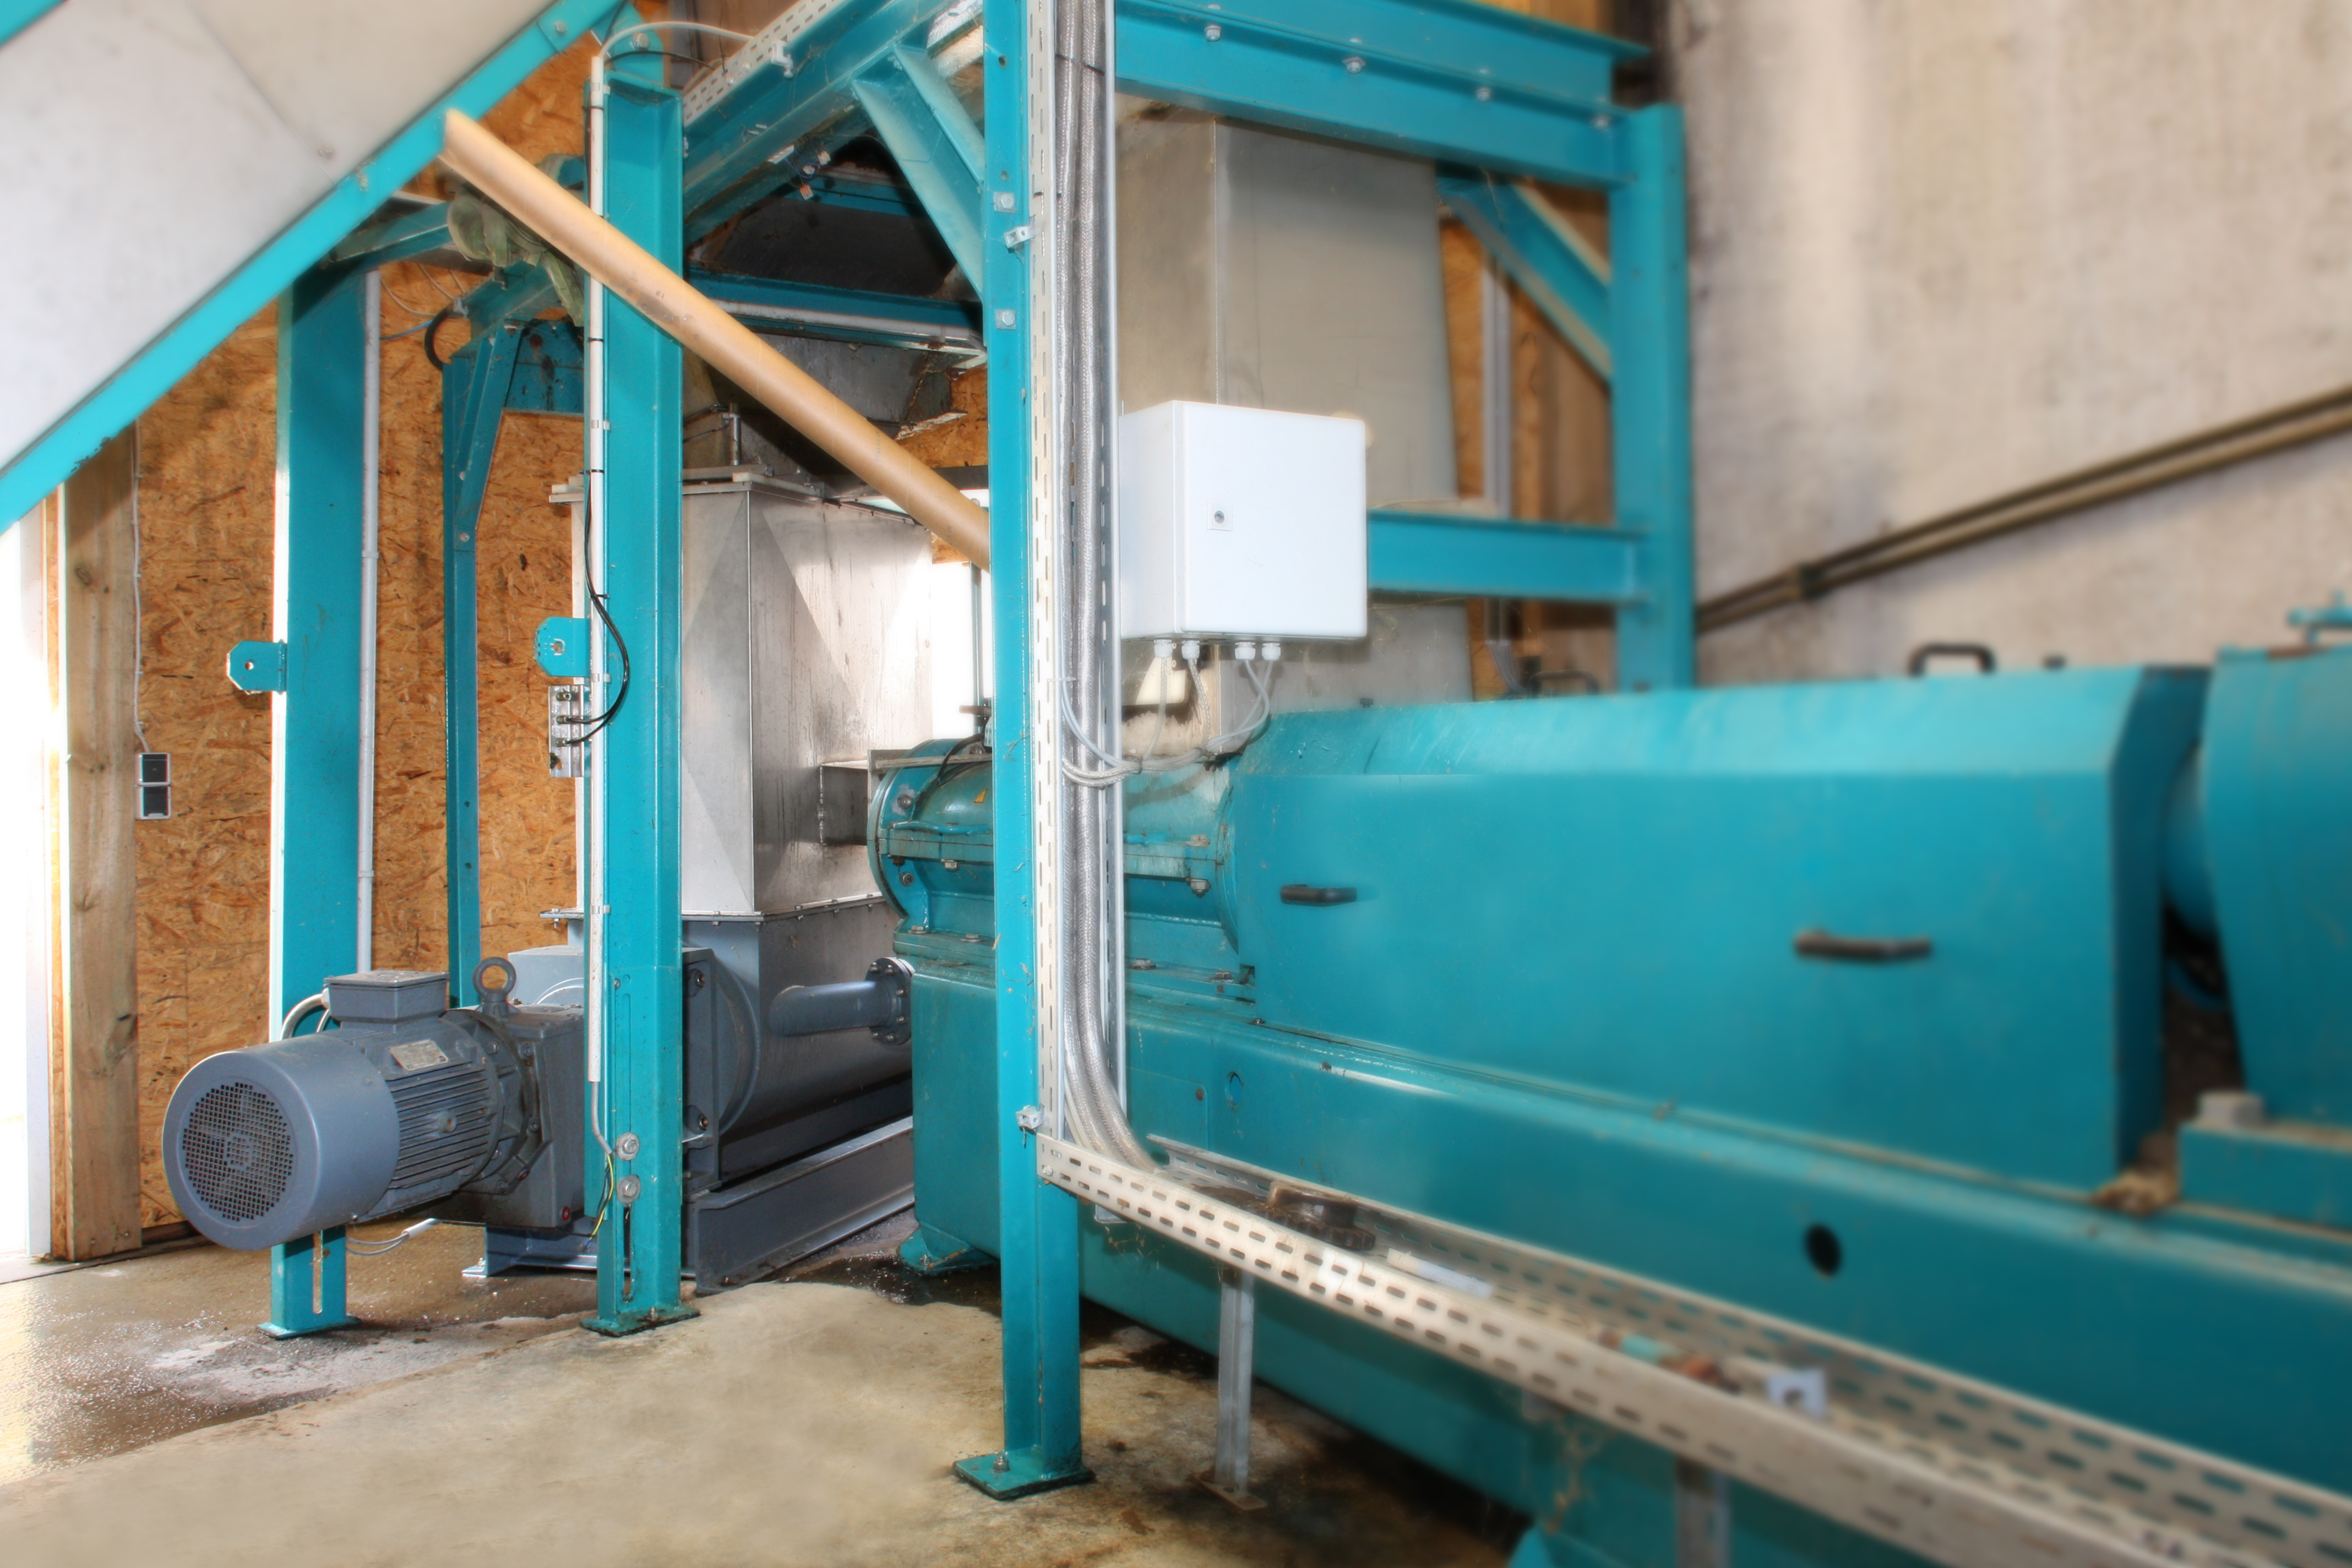 NETZSCH pumps provide improved mixing for better biogas yield